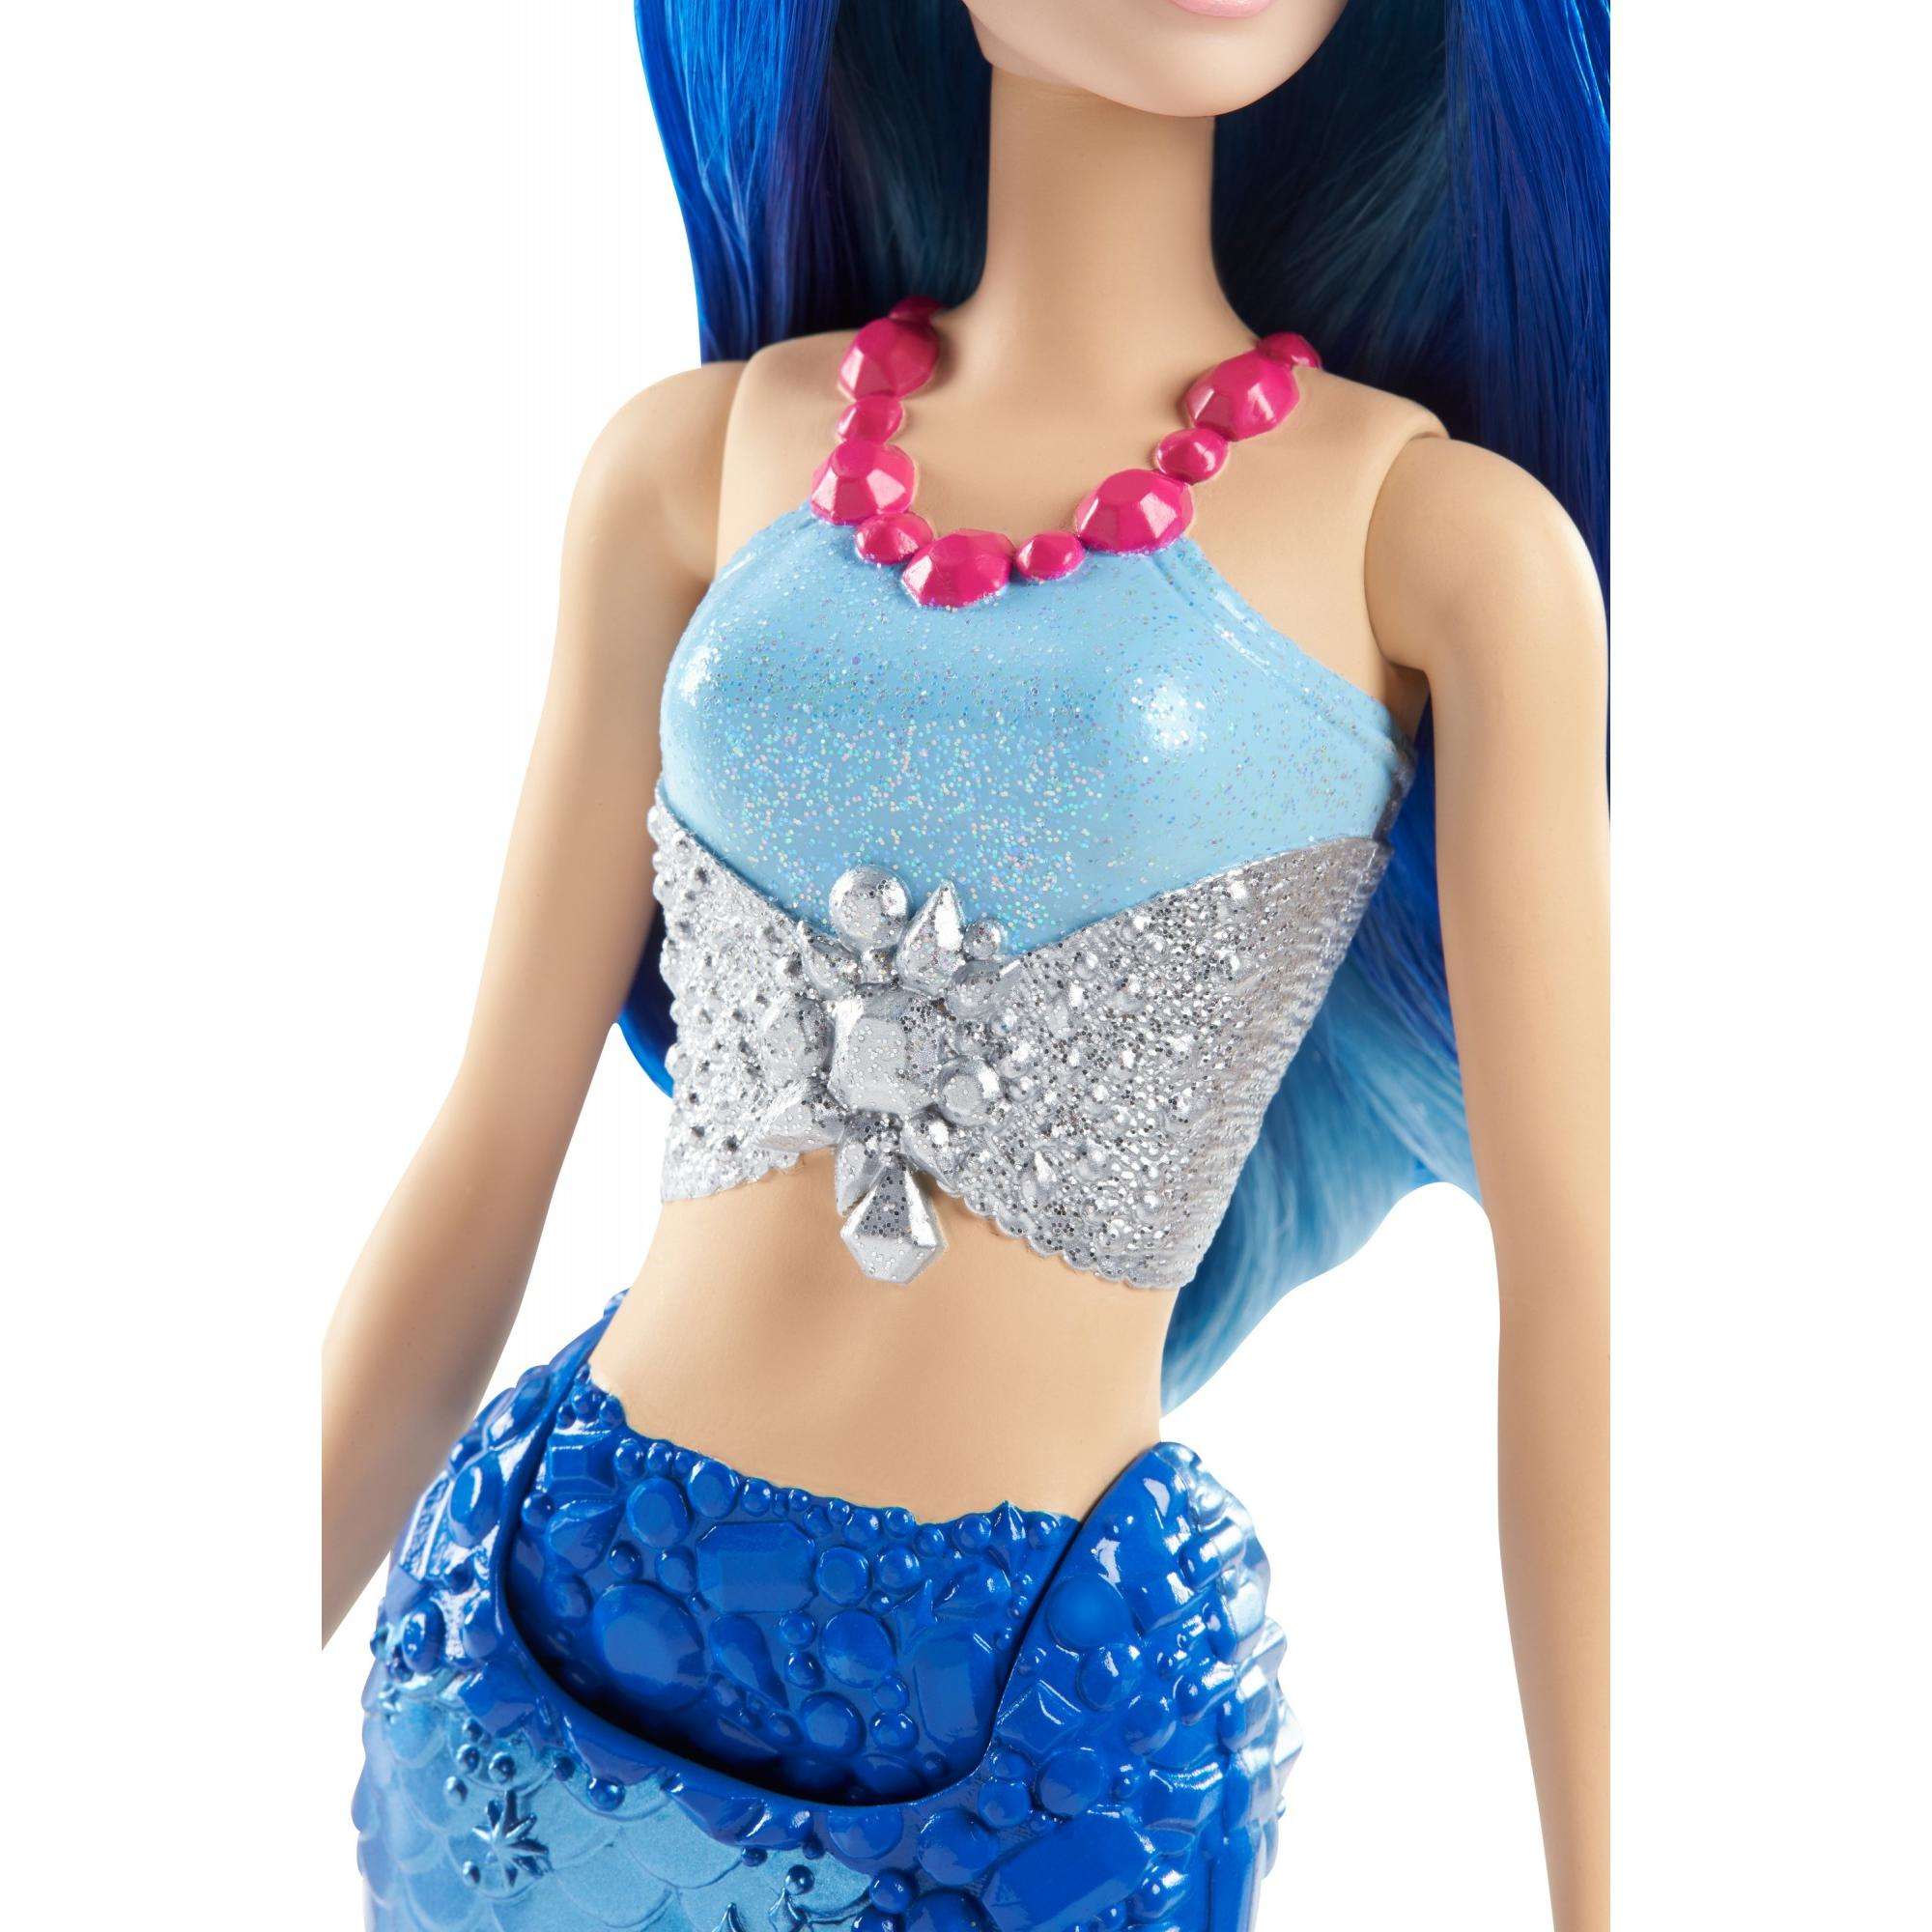 Barbie Dreamtopia Mermaid Doll with Blue Jewel-Themed Tail - image 4 of 5